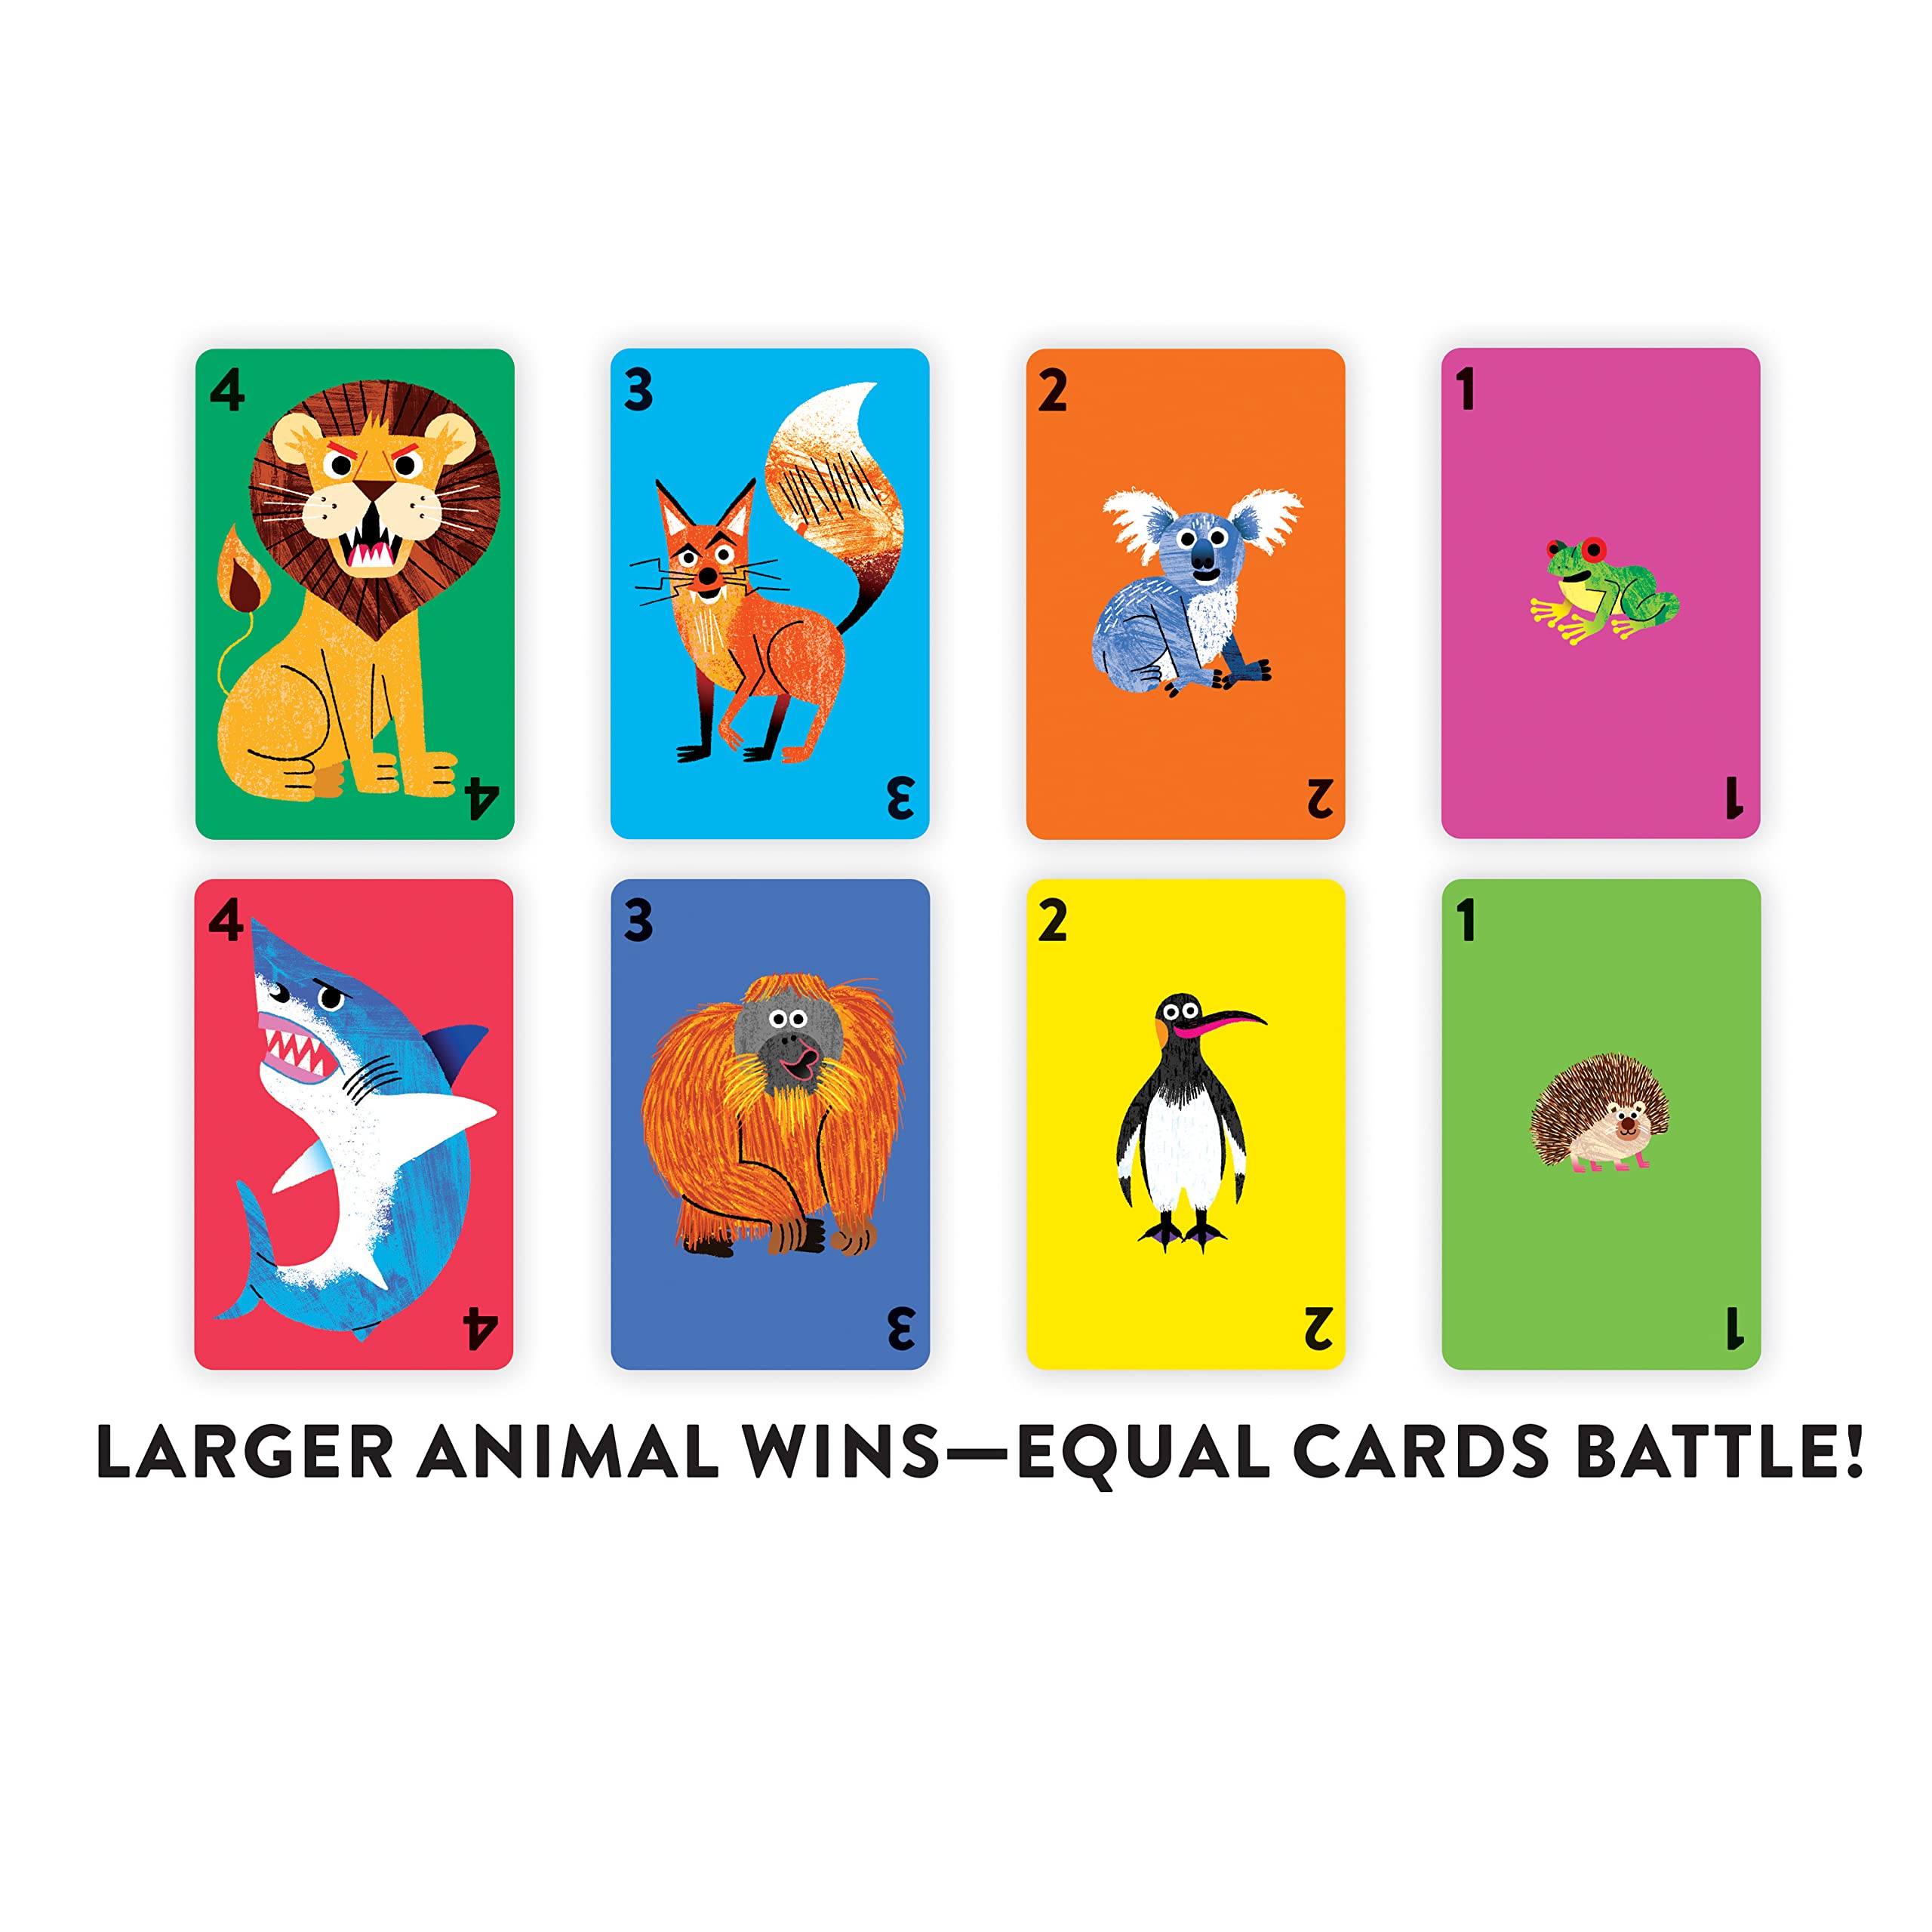 Mudpuppy Wild King! – Animal Version of Classic Kids War Card Game with Adorable Illustrations of Wild Animals for Children Ages 4 and Up, 2-4 Players